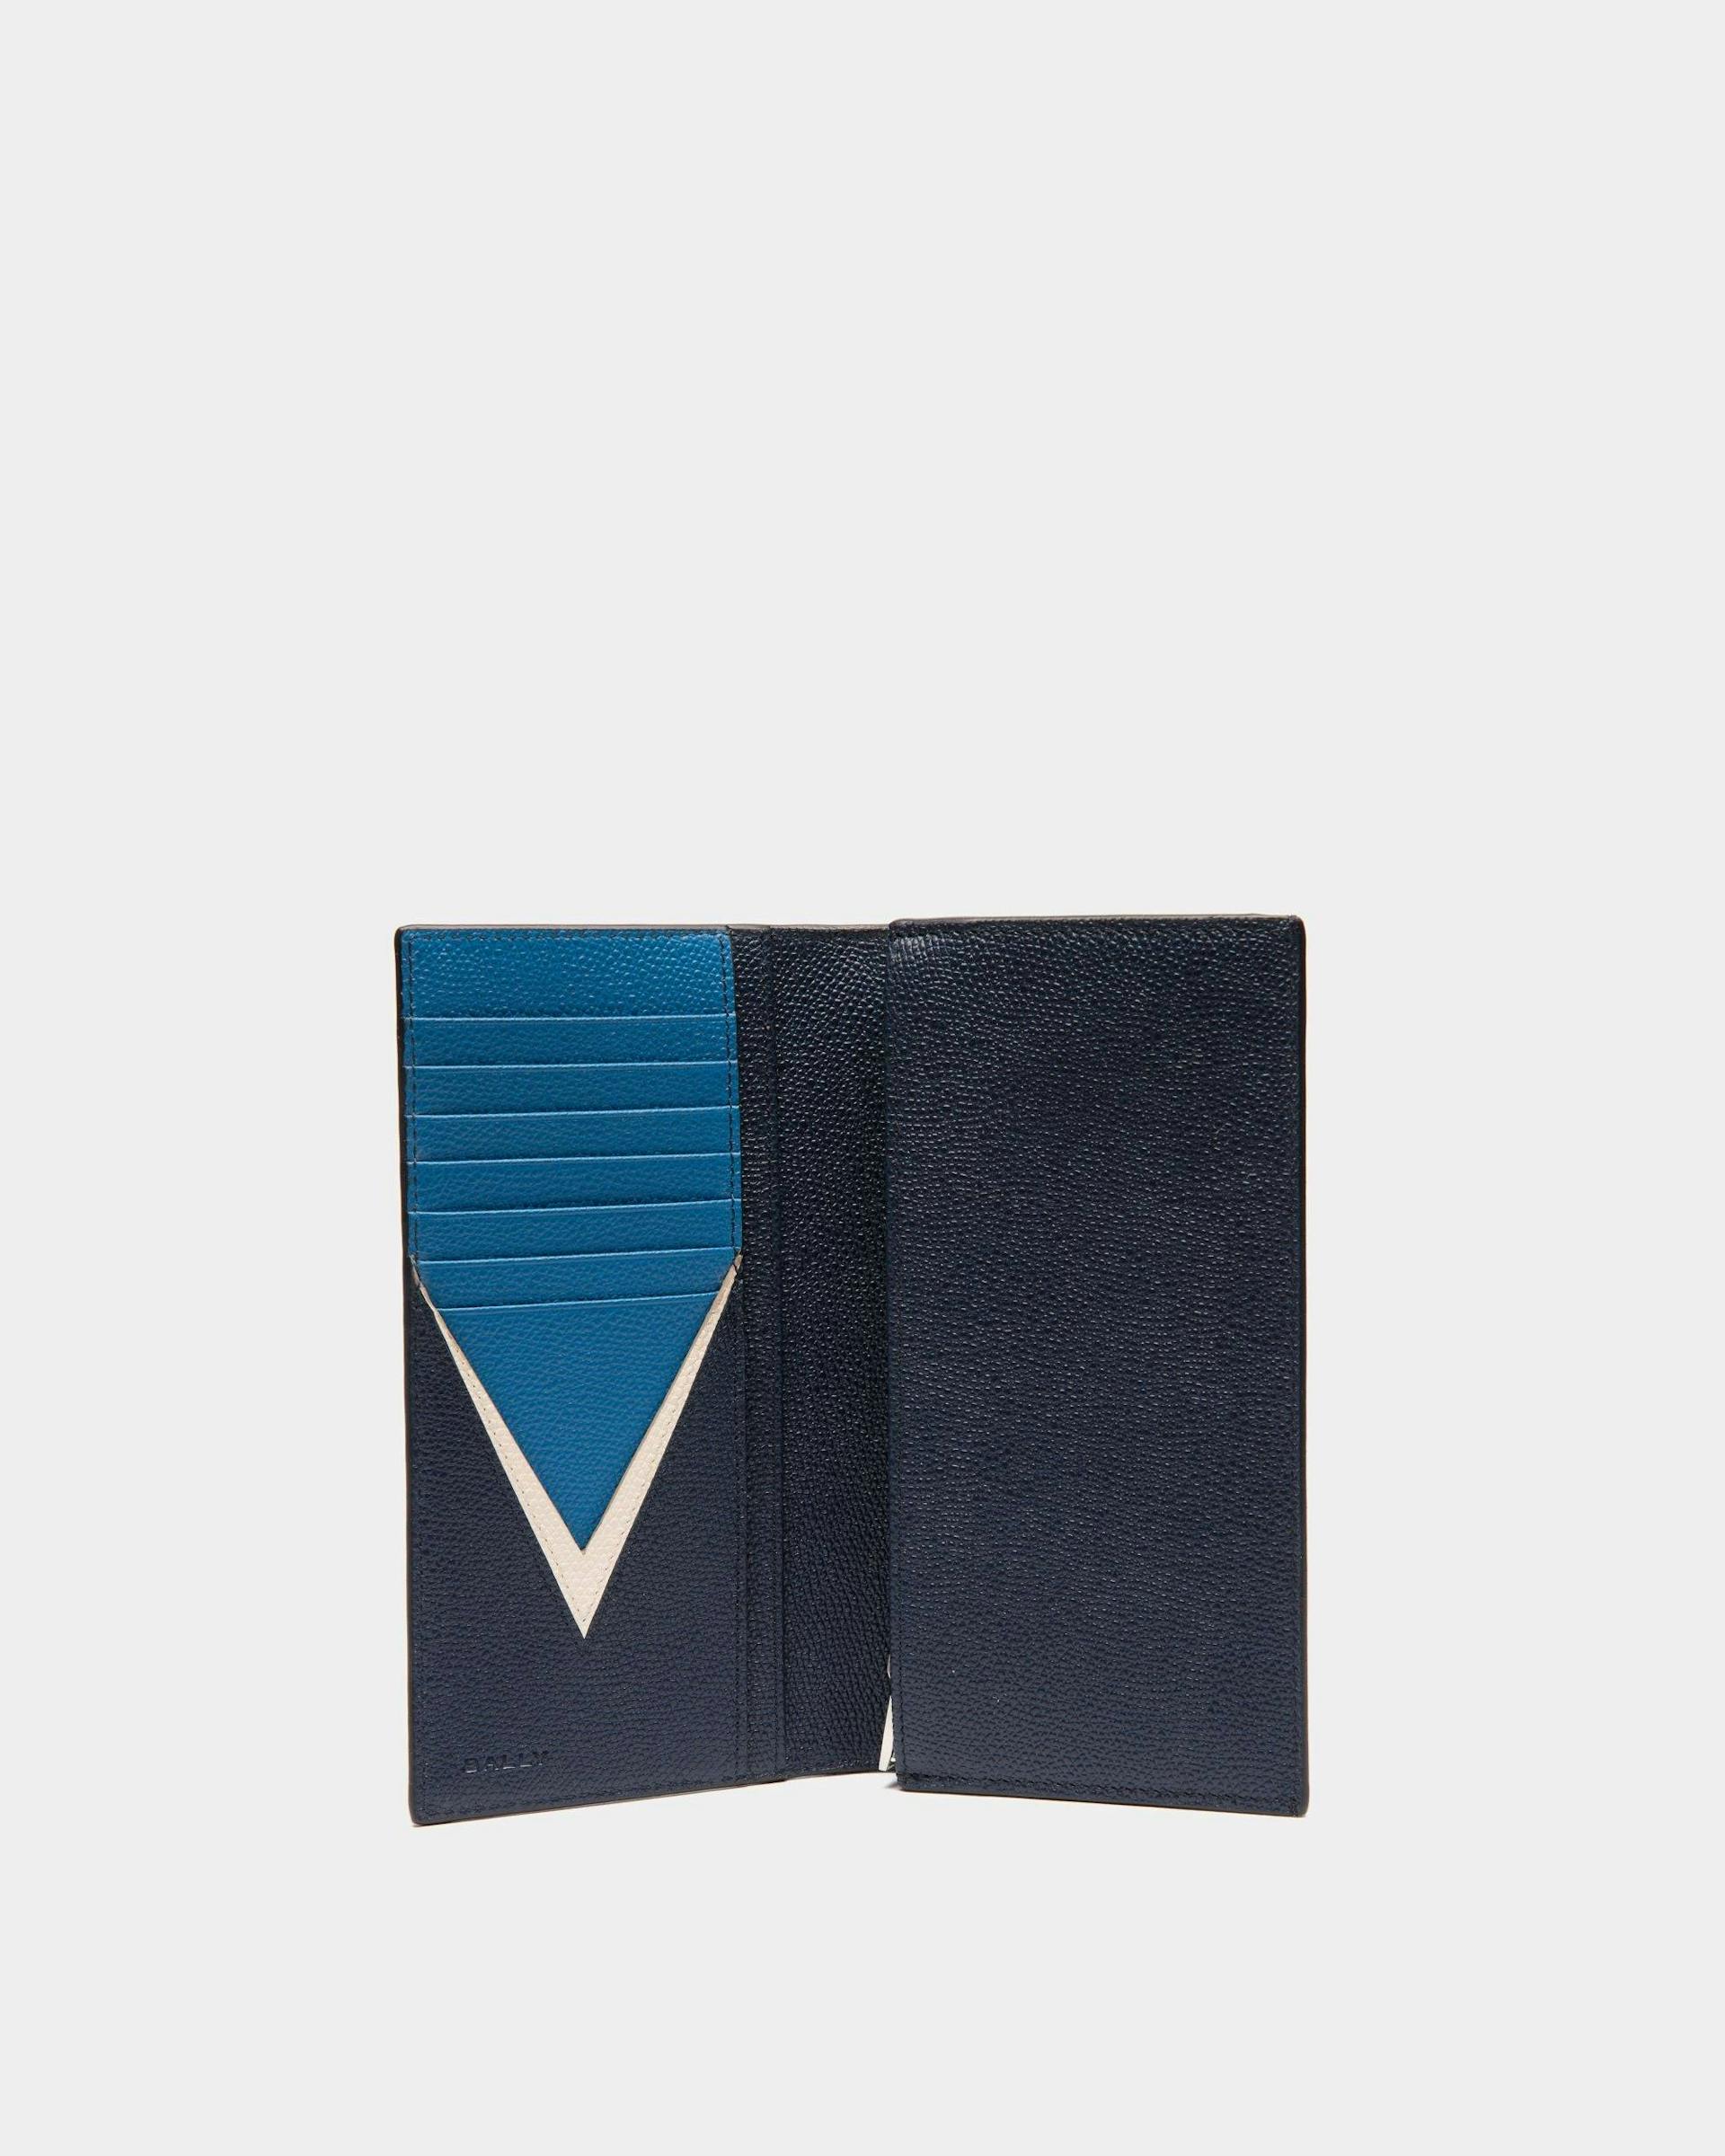 Men's Flag Continental Wallet in Blue Leather | Bally | Still Life Open / Inside